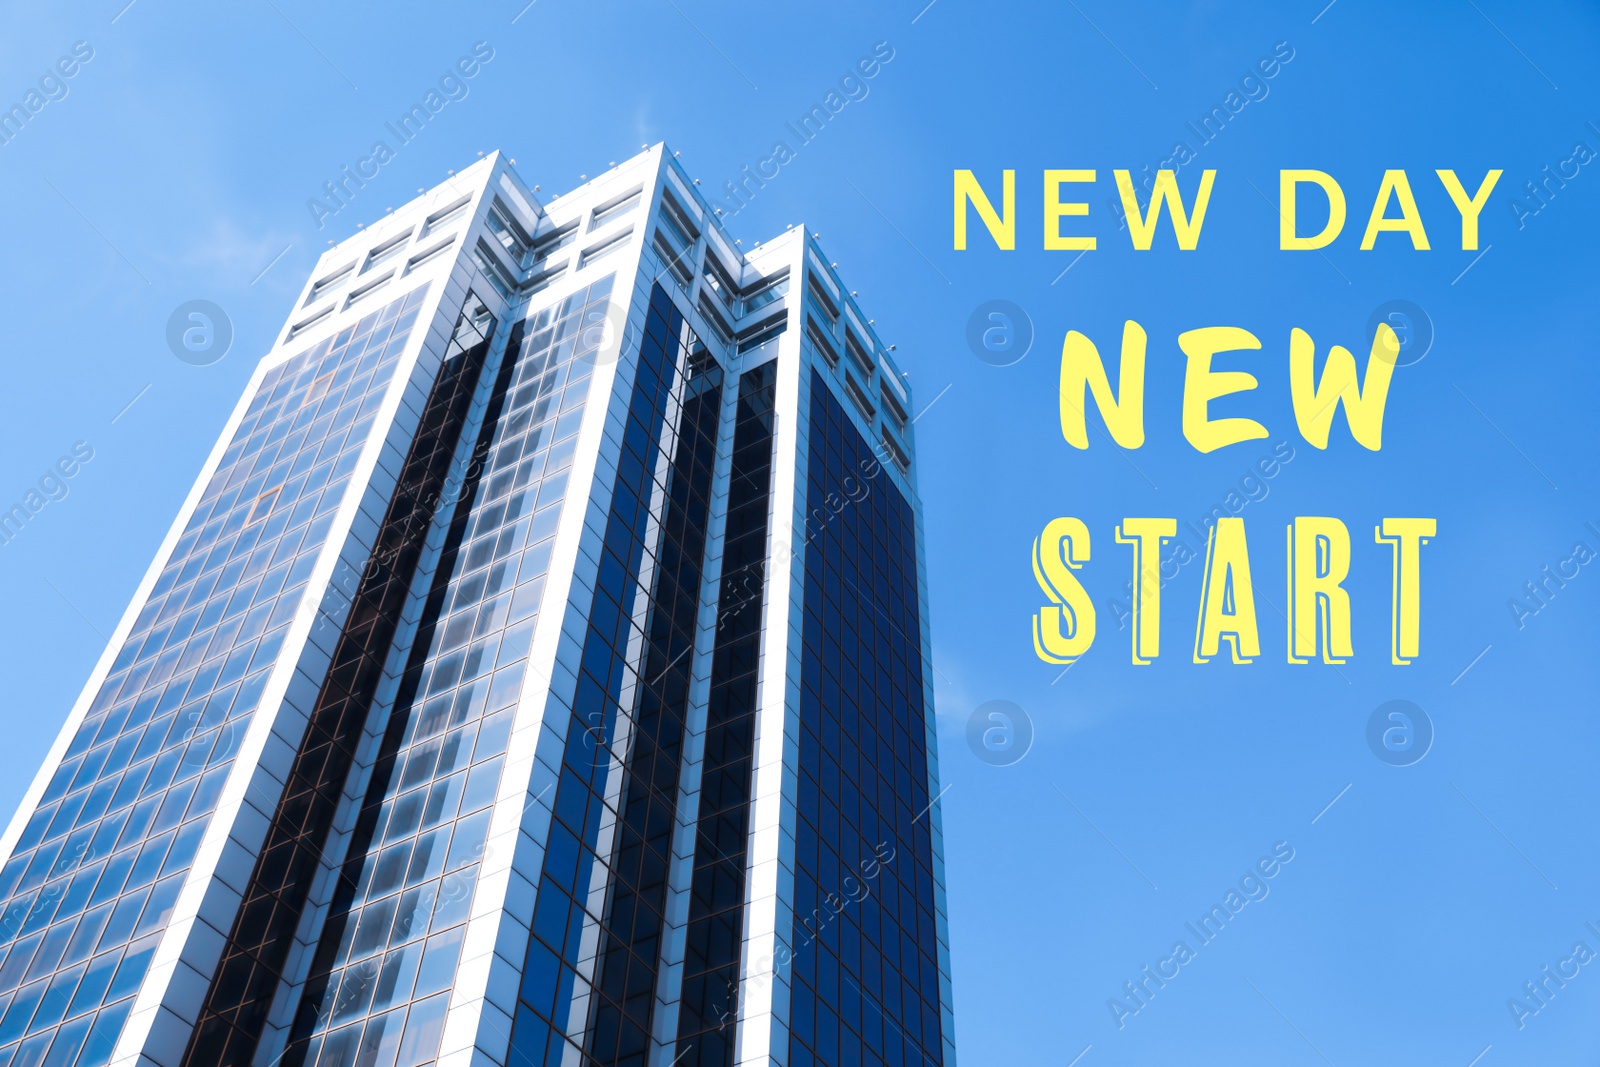 Image of Inspirational text New Day New Start and modern building against blue sky